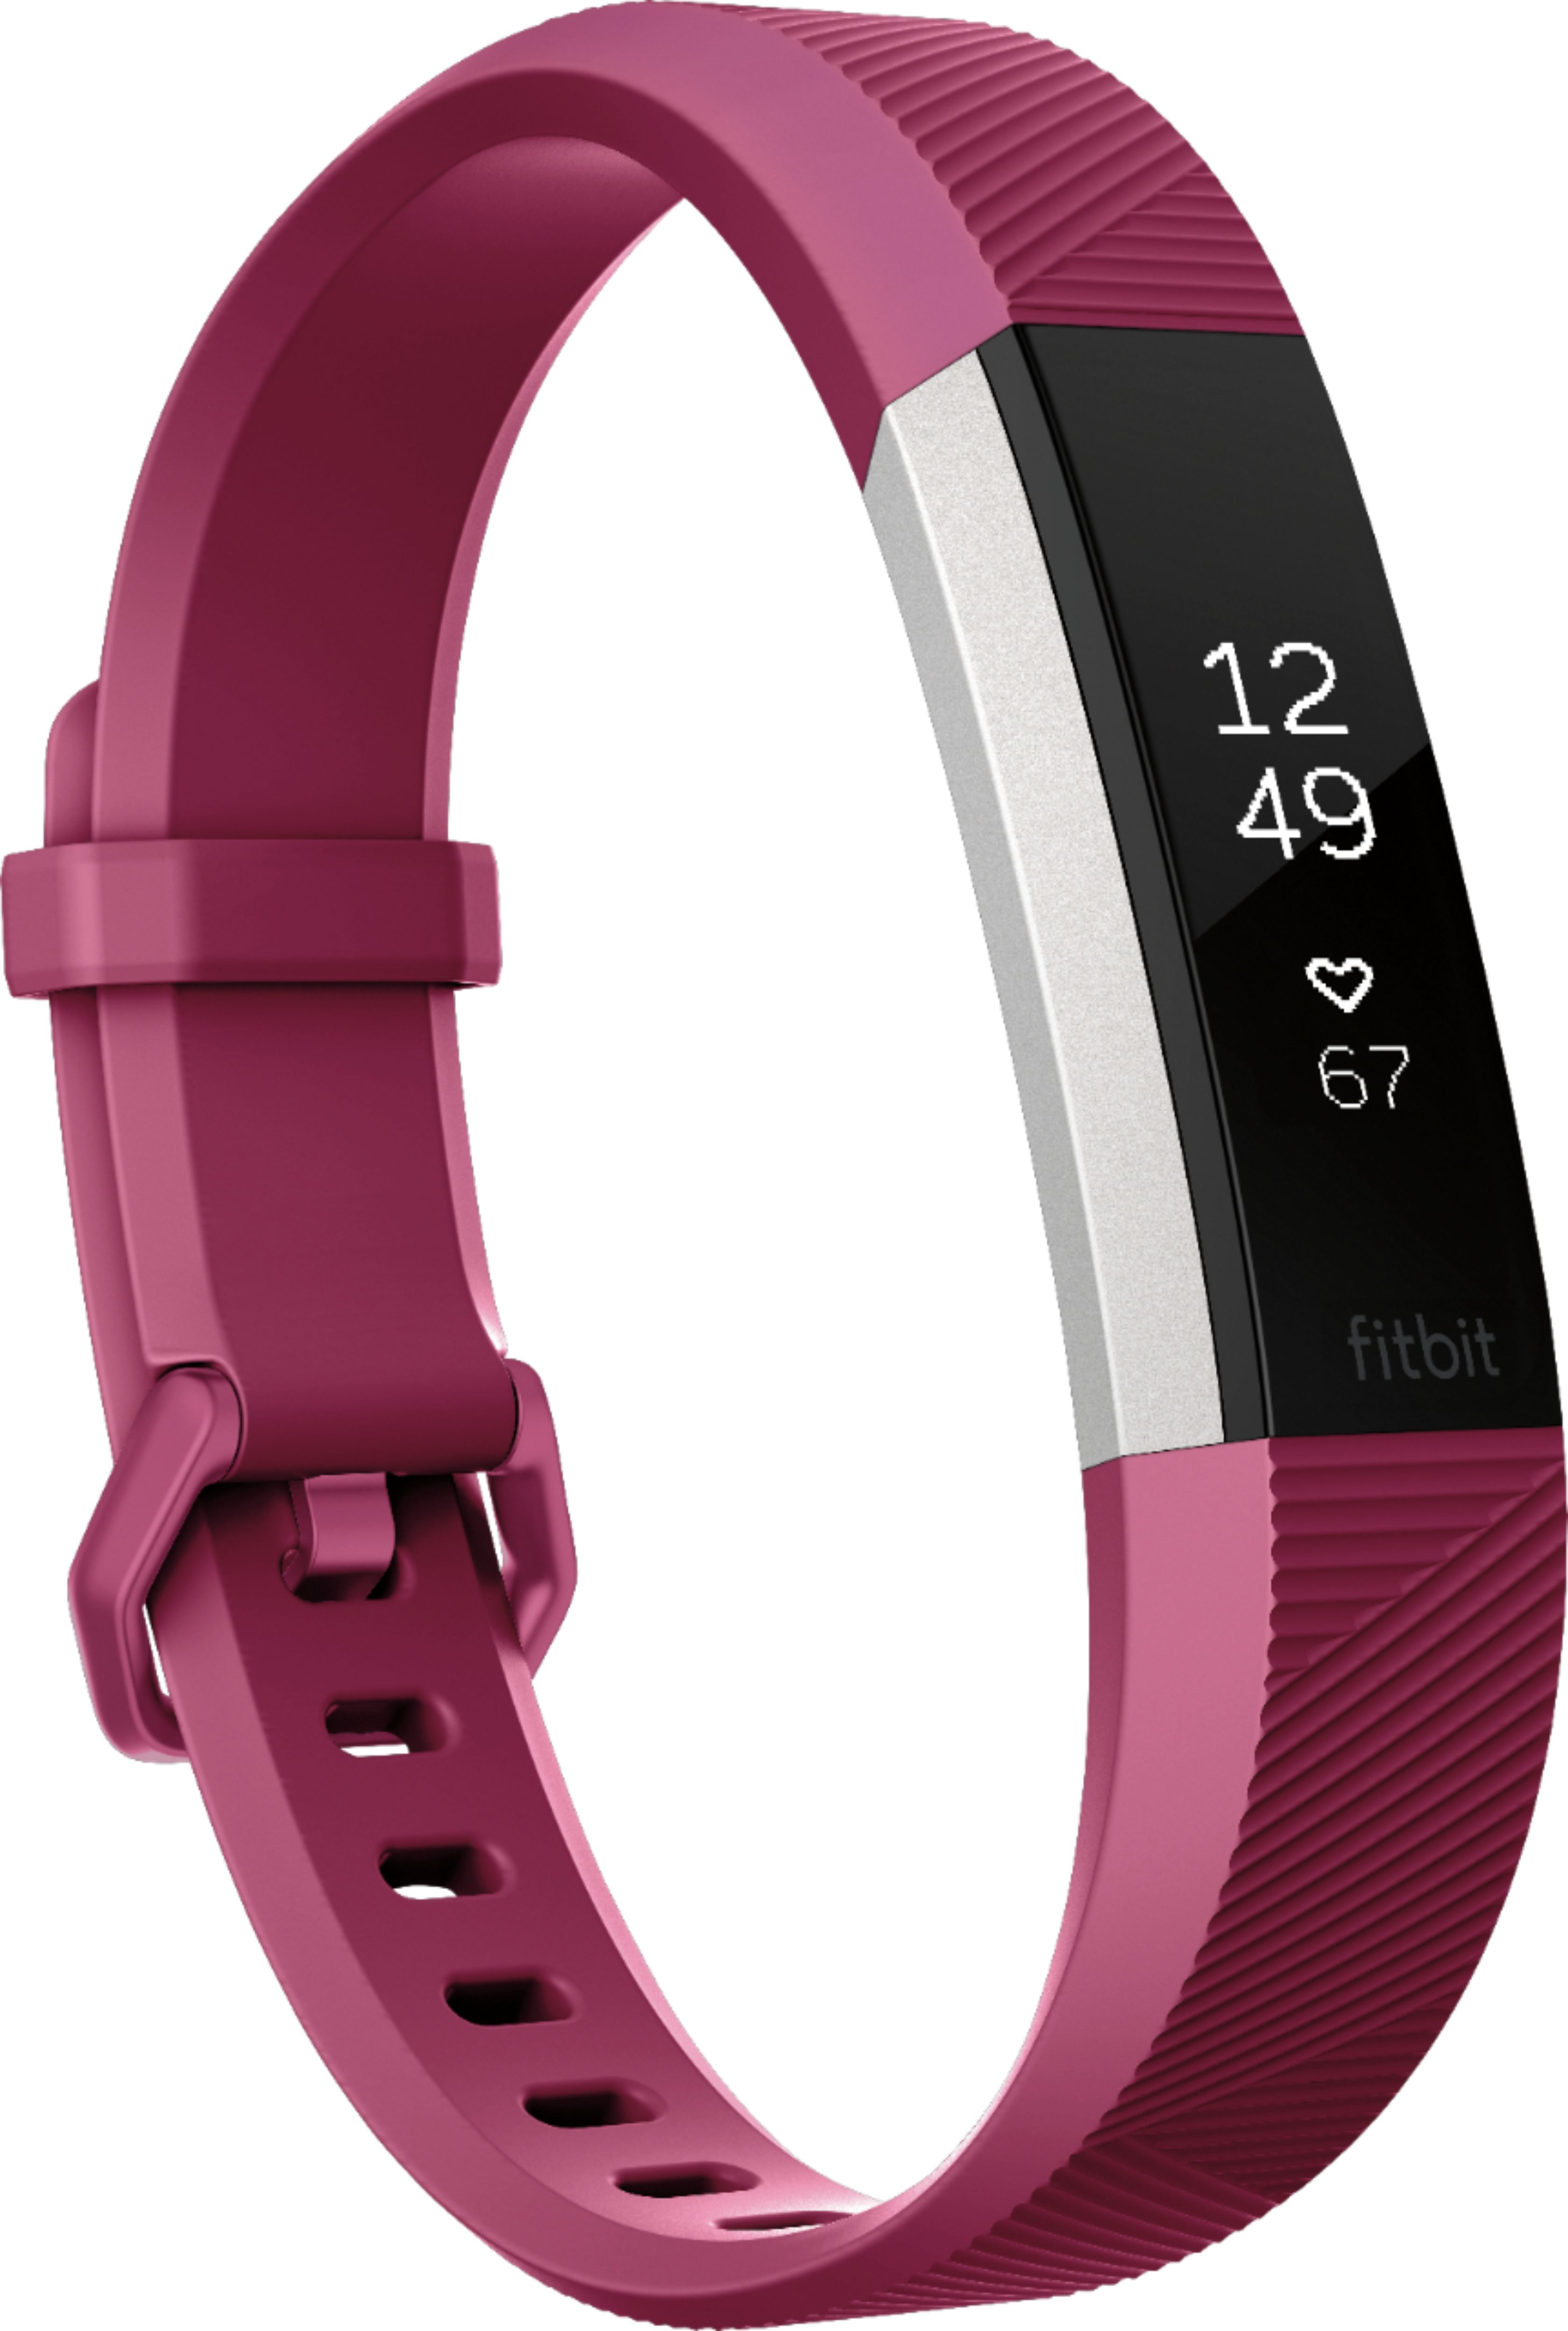 Questions and Answers: Fitbit Alta HR Activity Tracker + Heart Rate ...